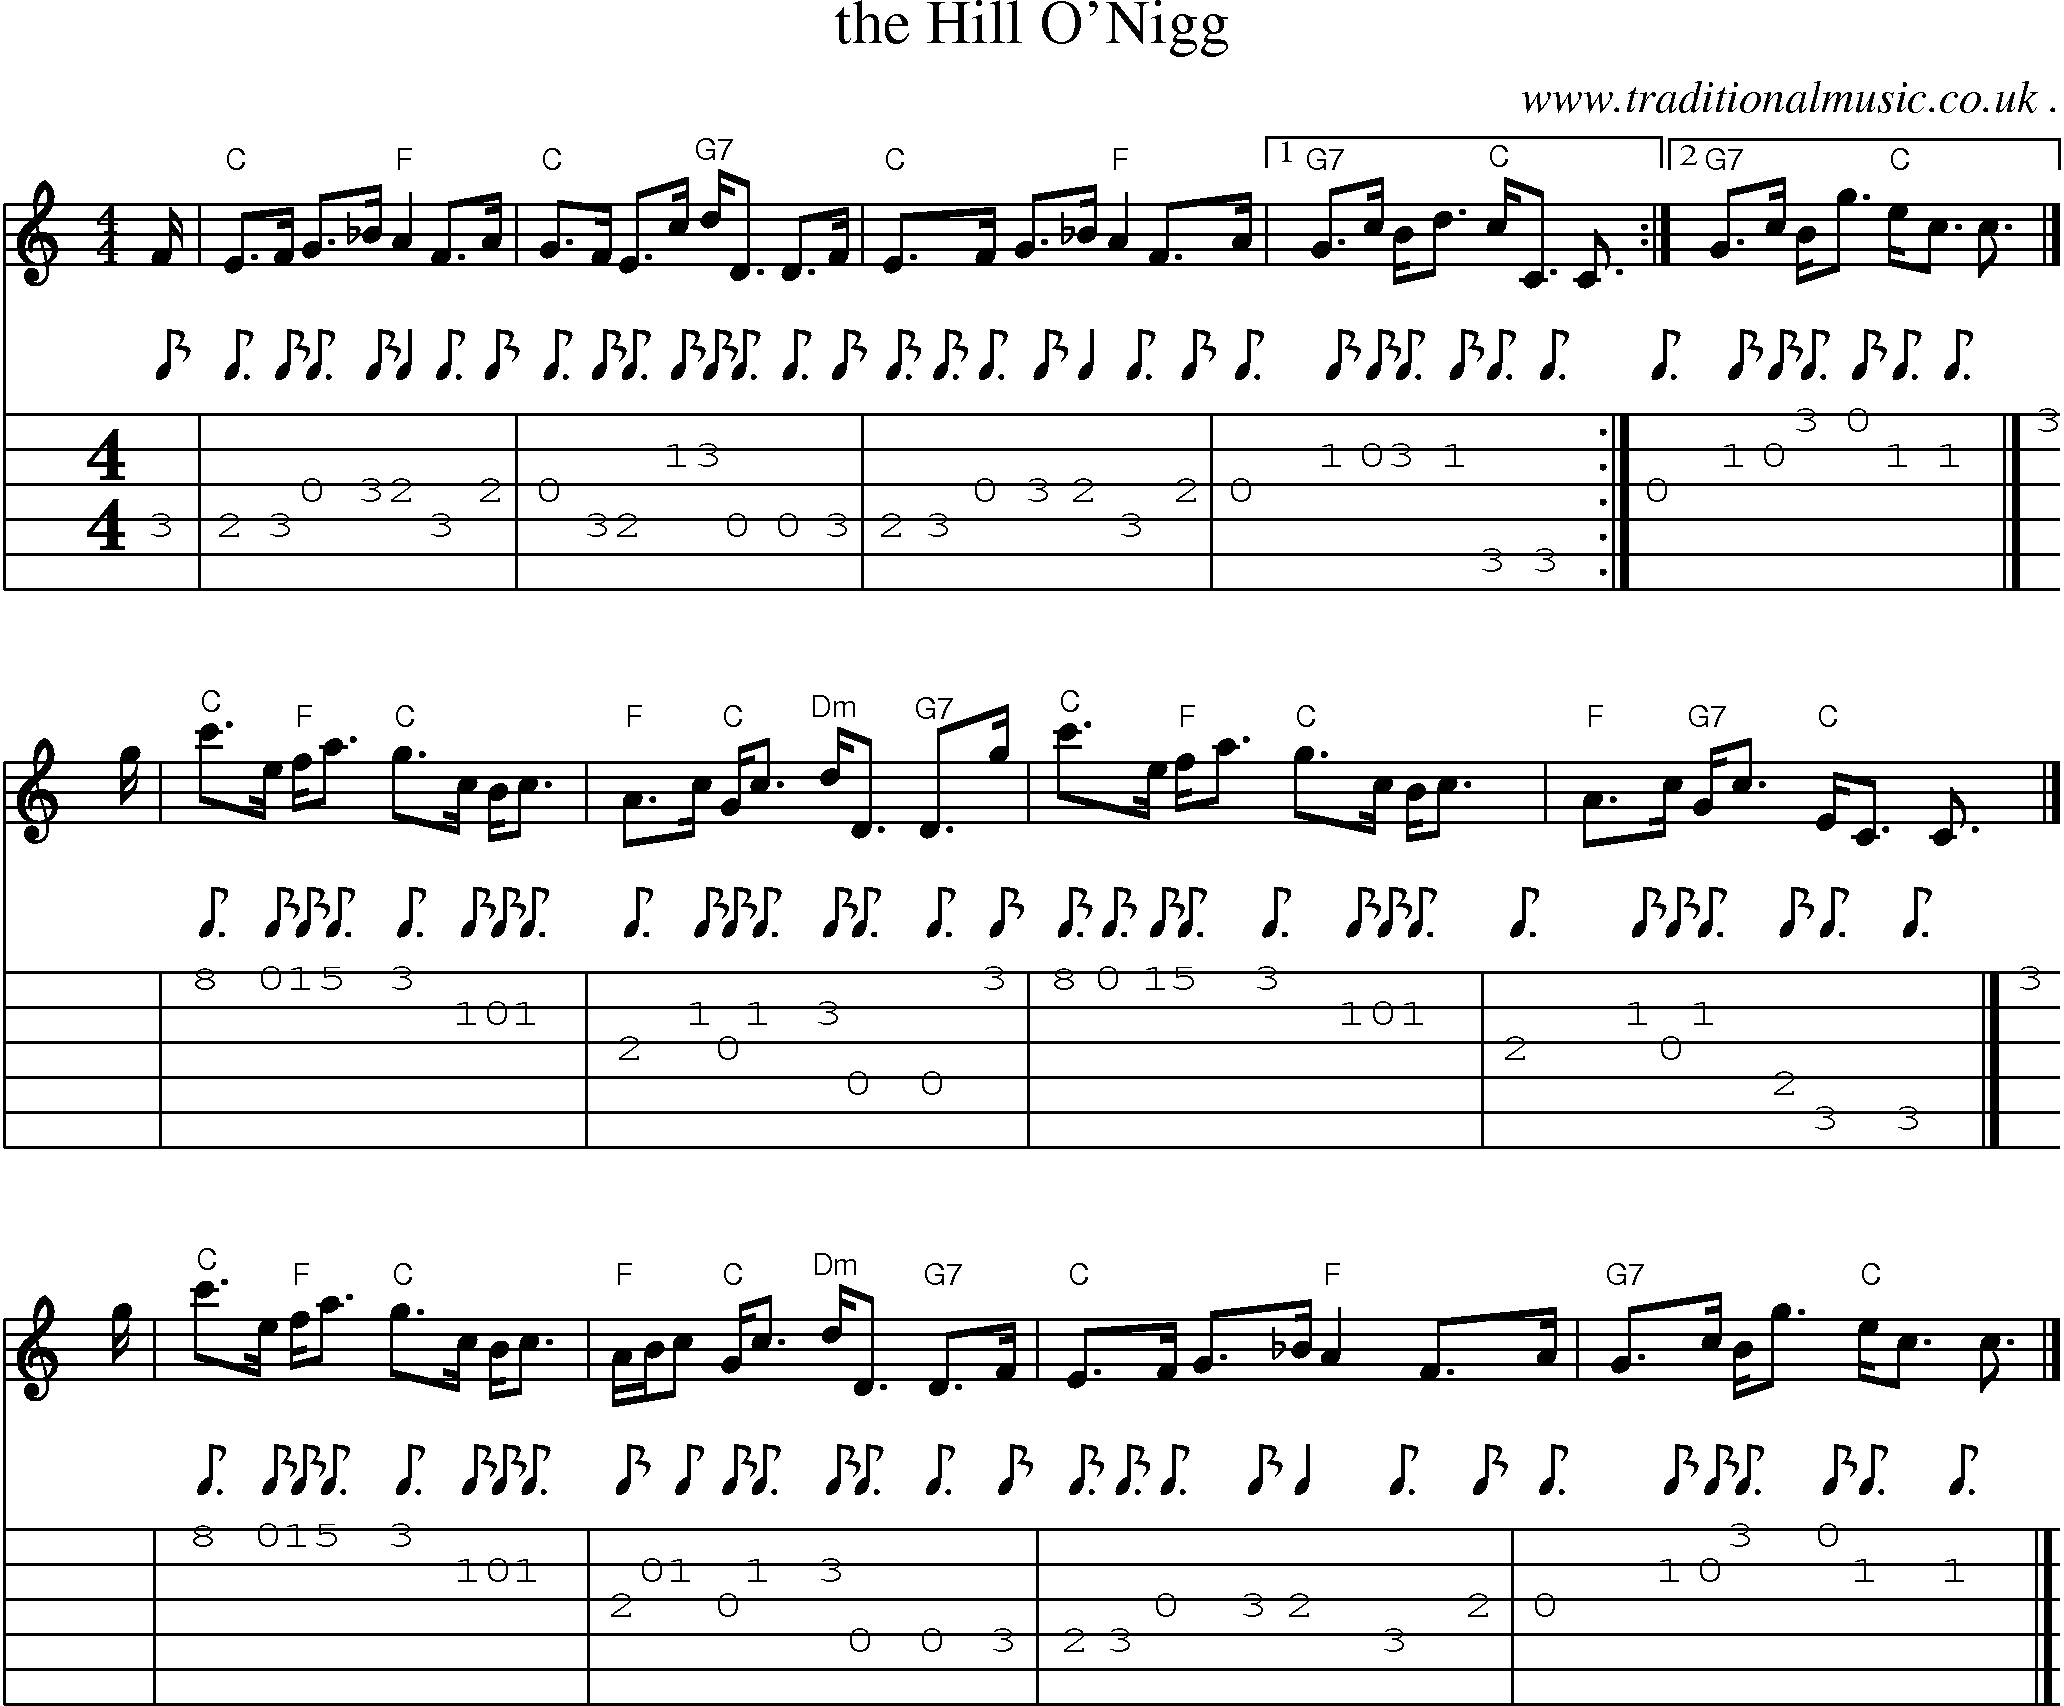 Sheet-music  score, Chords and Guitar Tabs for The Hill Onigg